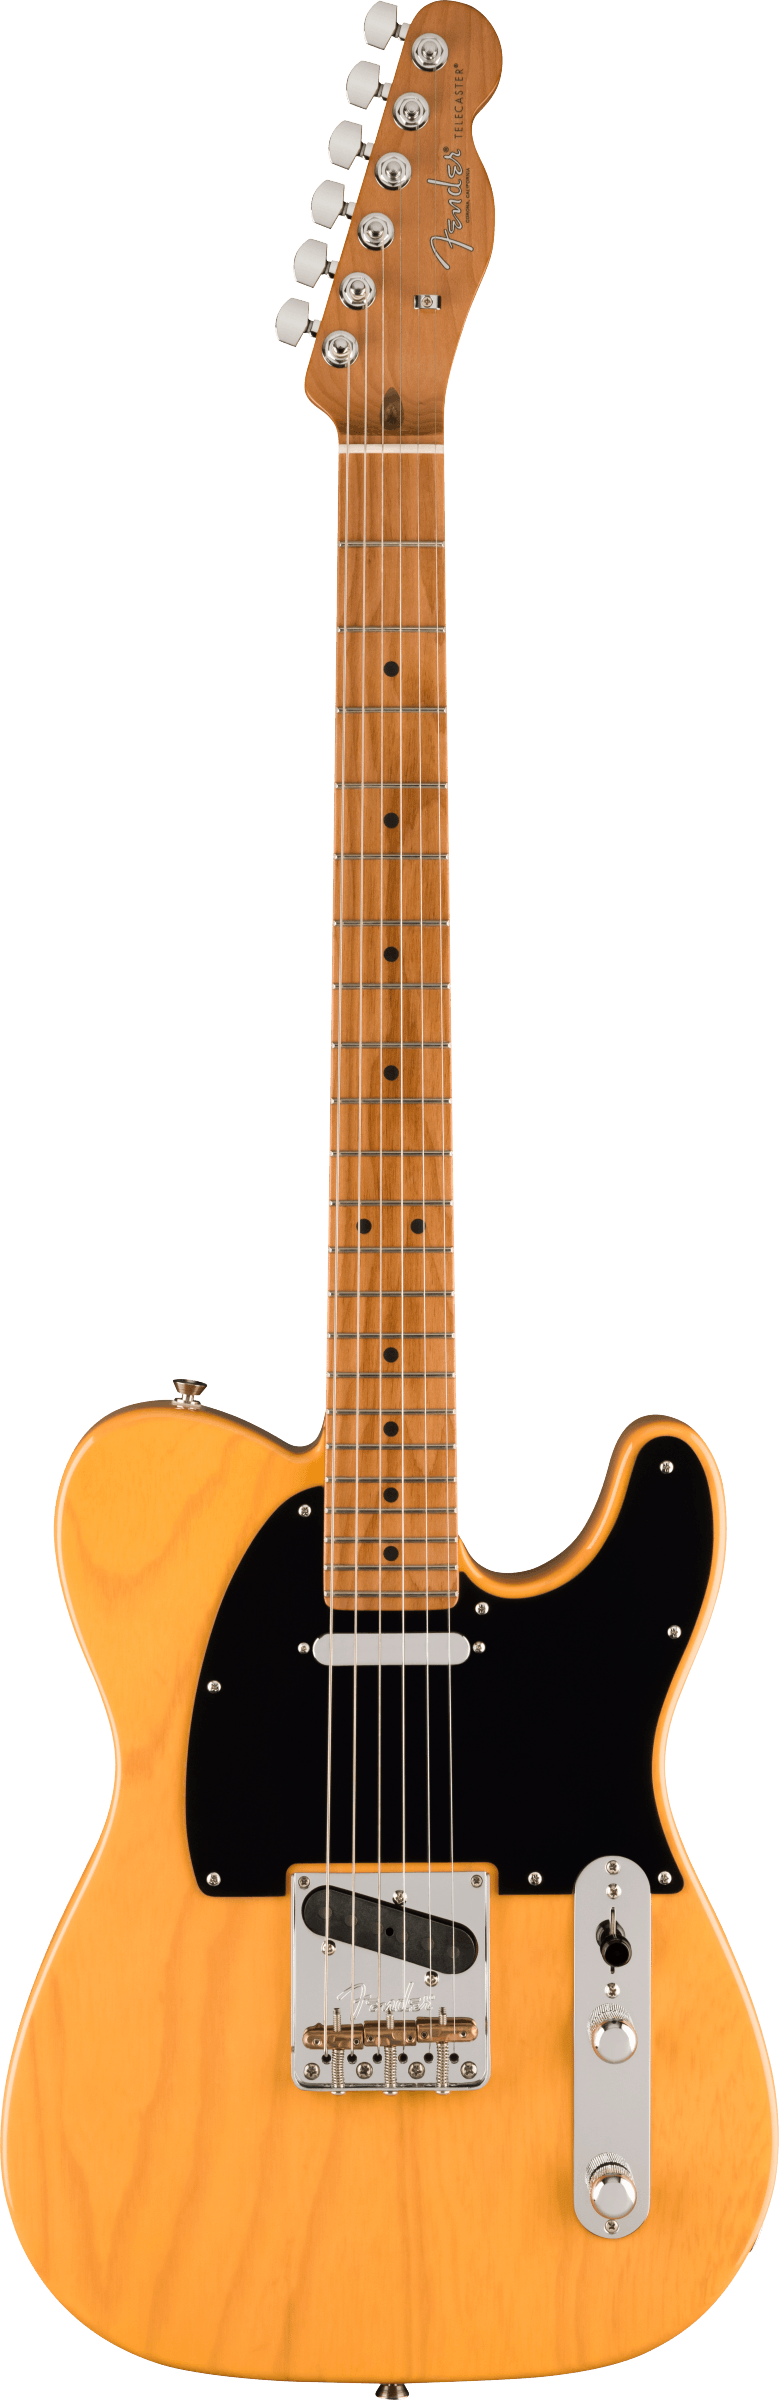 Full frontal of Fender Limited Edition American Professional II Tele Roasted MP Butterscotch Blonde Ash.